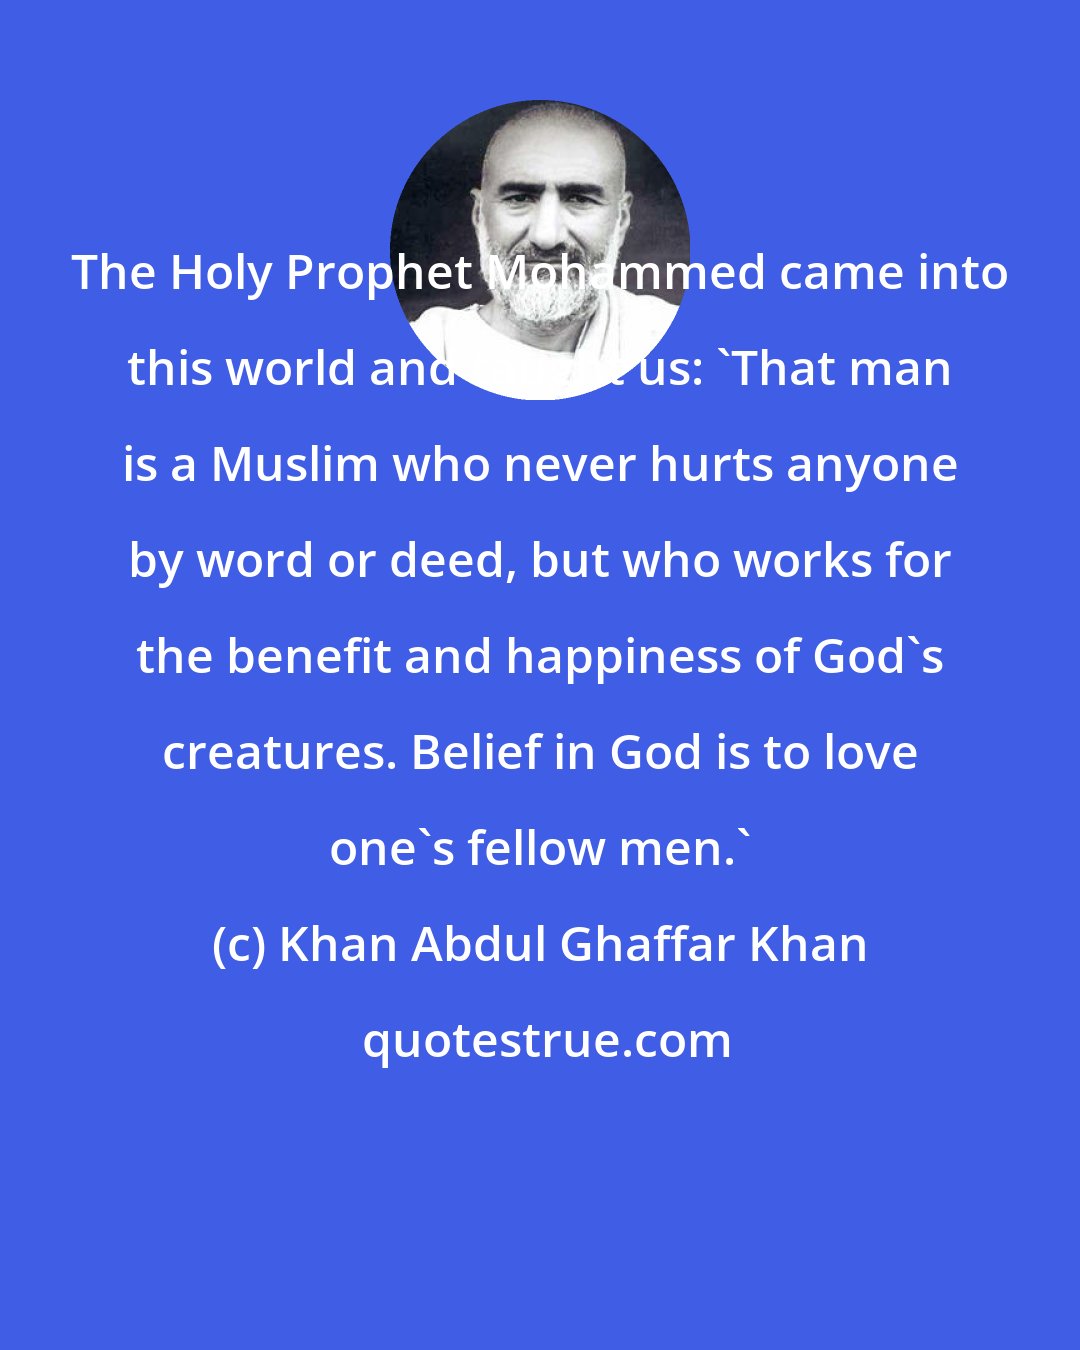 Khan Abdul Ghaffar Khan: The Holy Prophet Mohammed came into this world and taught us: 'That man is a Muslim who never hurts anyone by word or deed, but who works for the benefit and happiness of God's creatures. Belief in God is to love one's fellow men.'